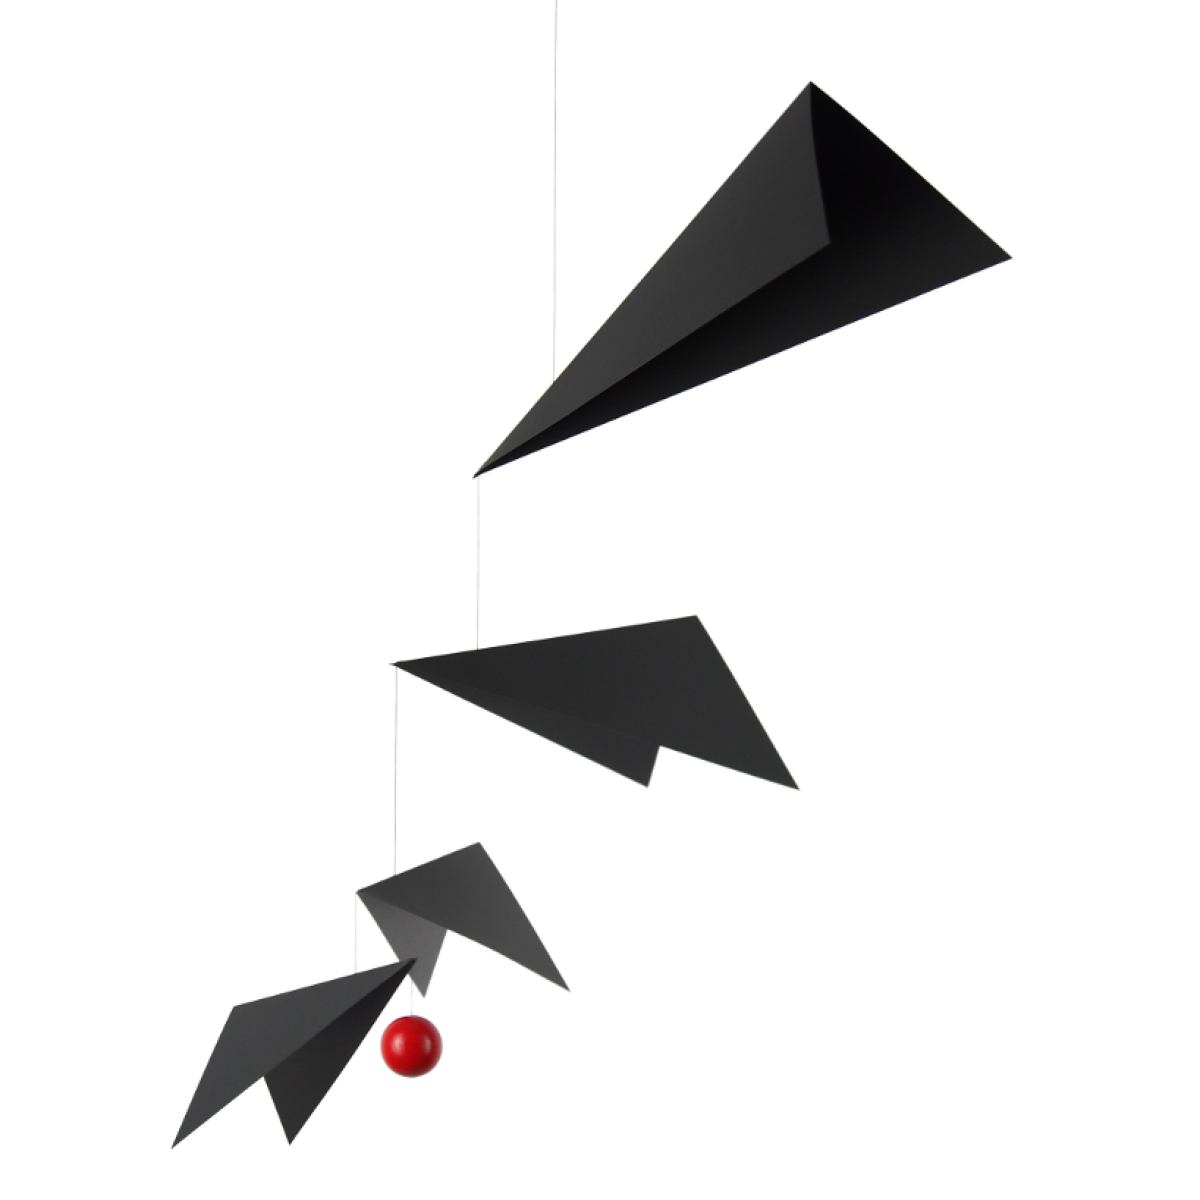 Mobile "Wings" with black flying objects (60 x 65 cm)